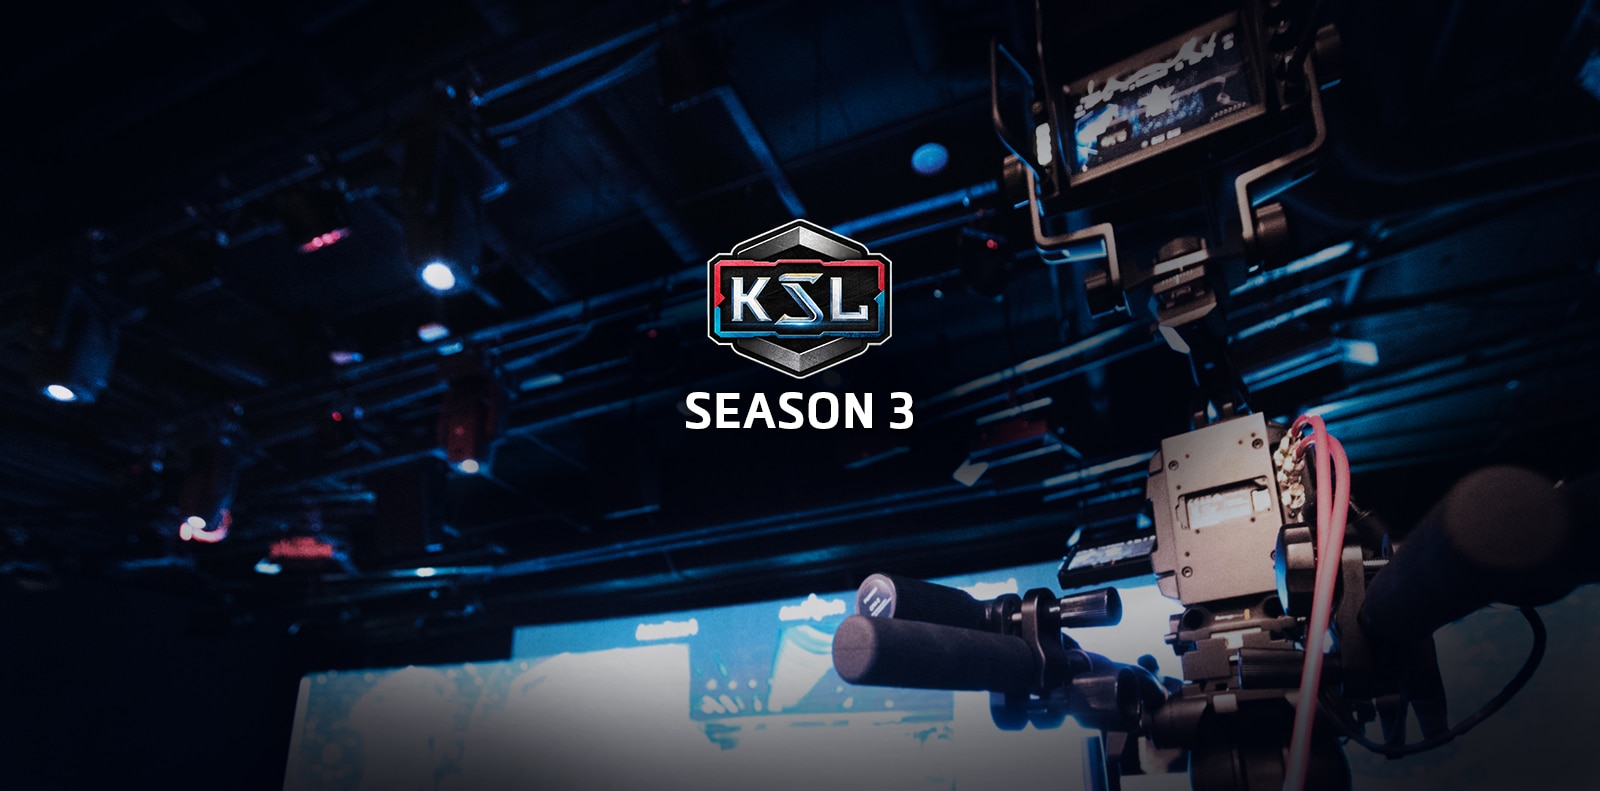 New KSL Season for 2019 is coming!